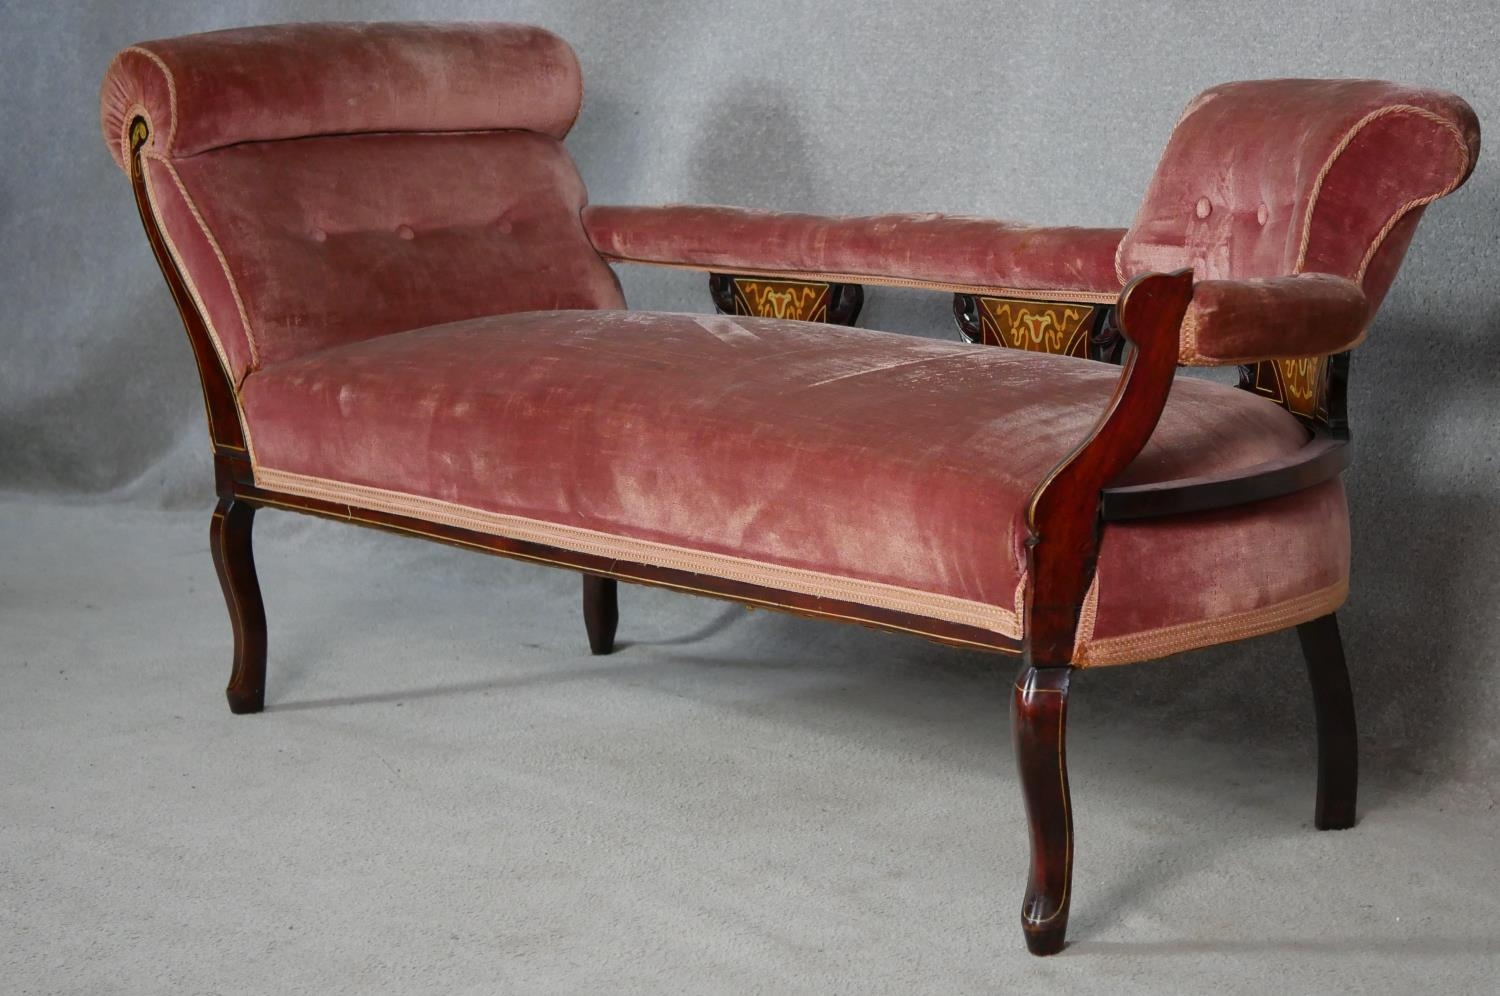 A late Victorian mahogany framed double end chaise longue in buttoned velour upholstery and with - Image 2 of 6